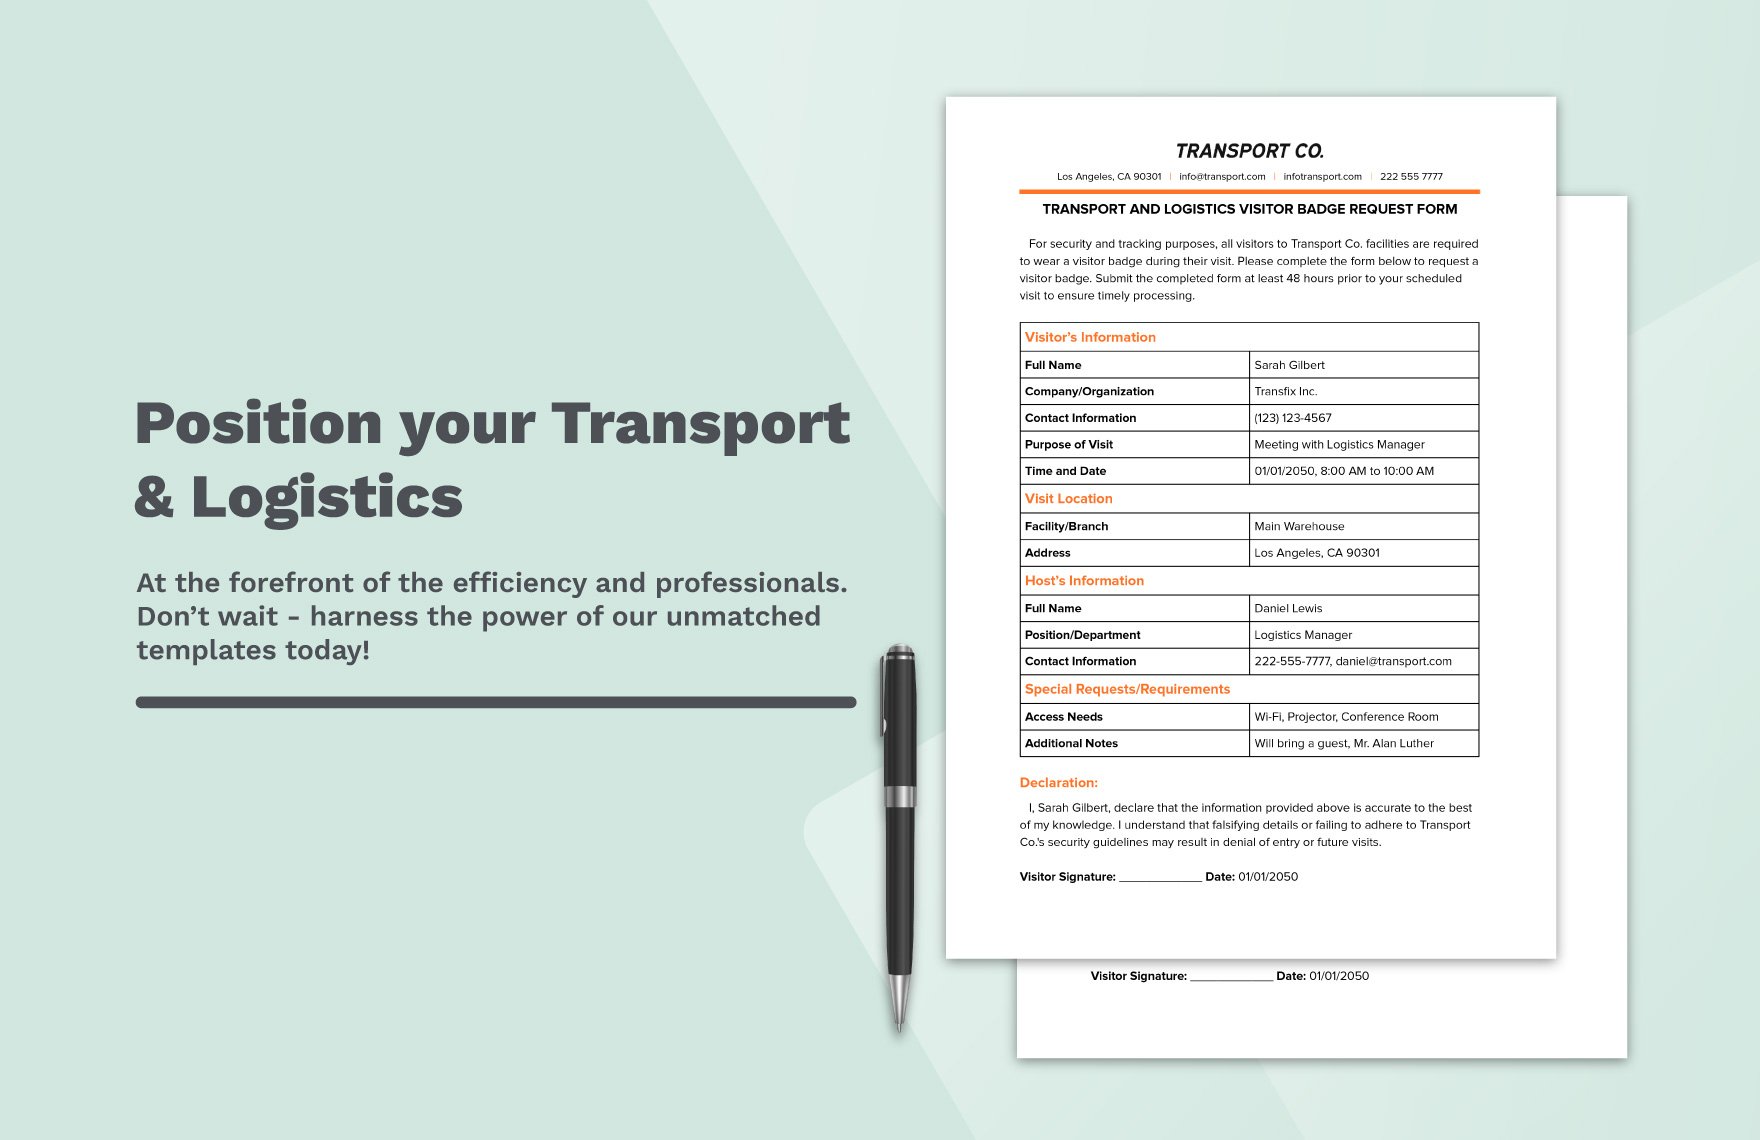 Transport and Logistics Visitor Badge Request Form Template